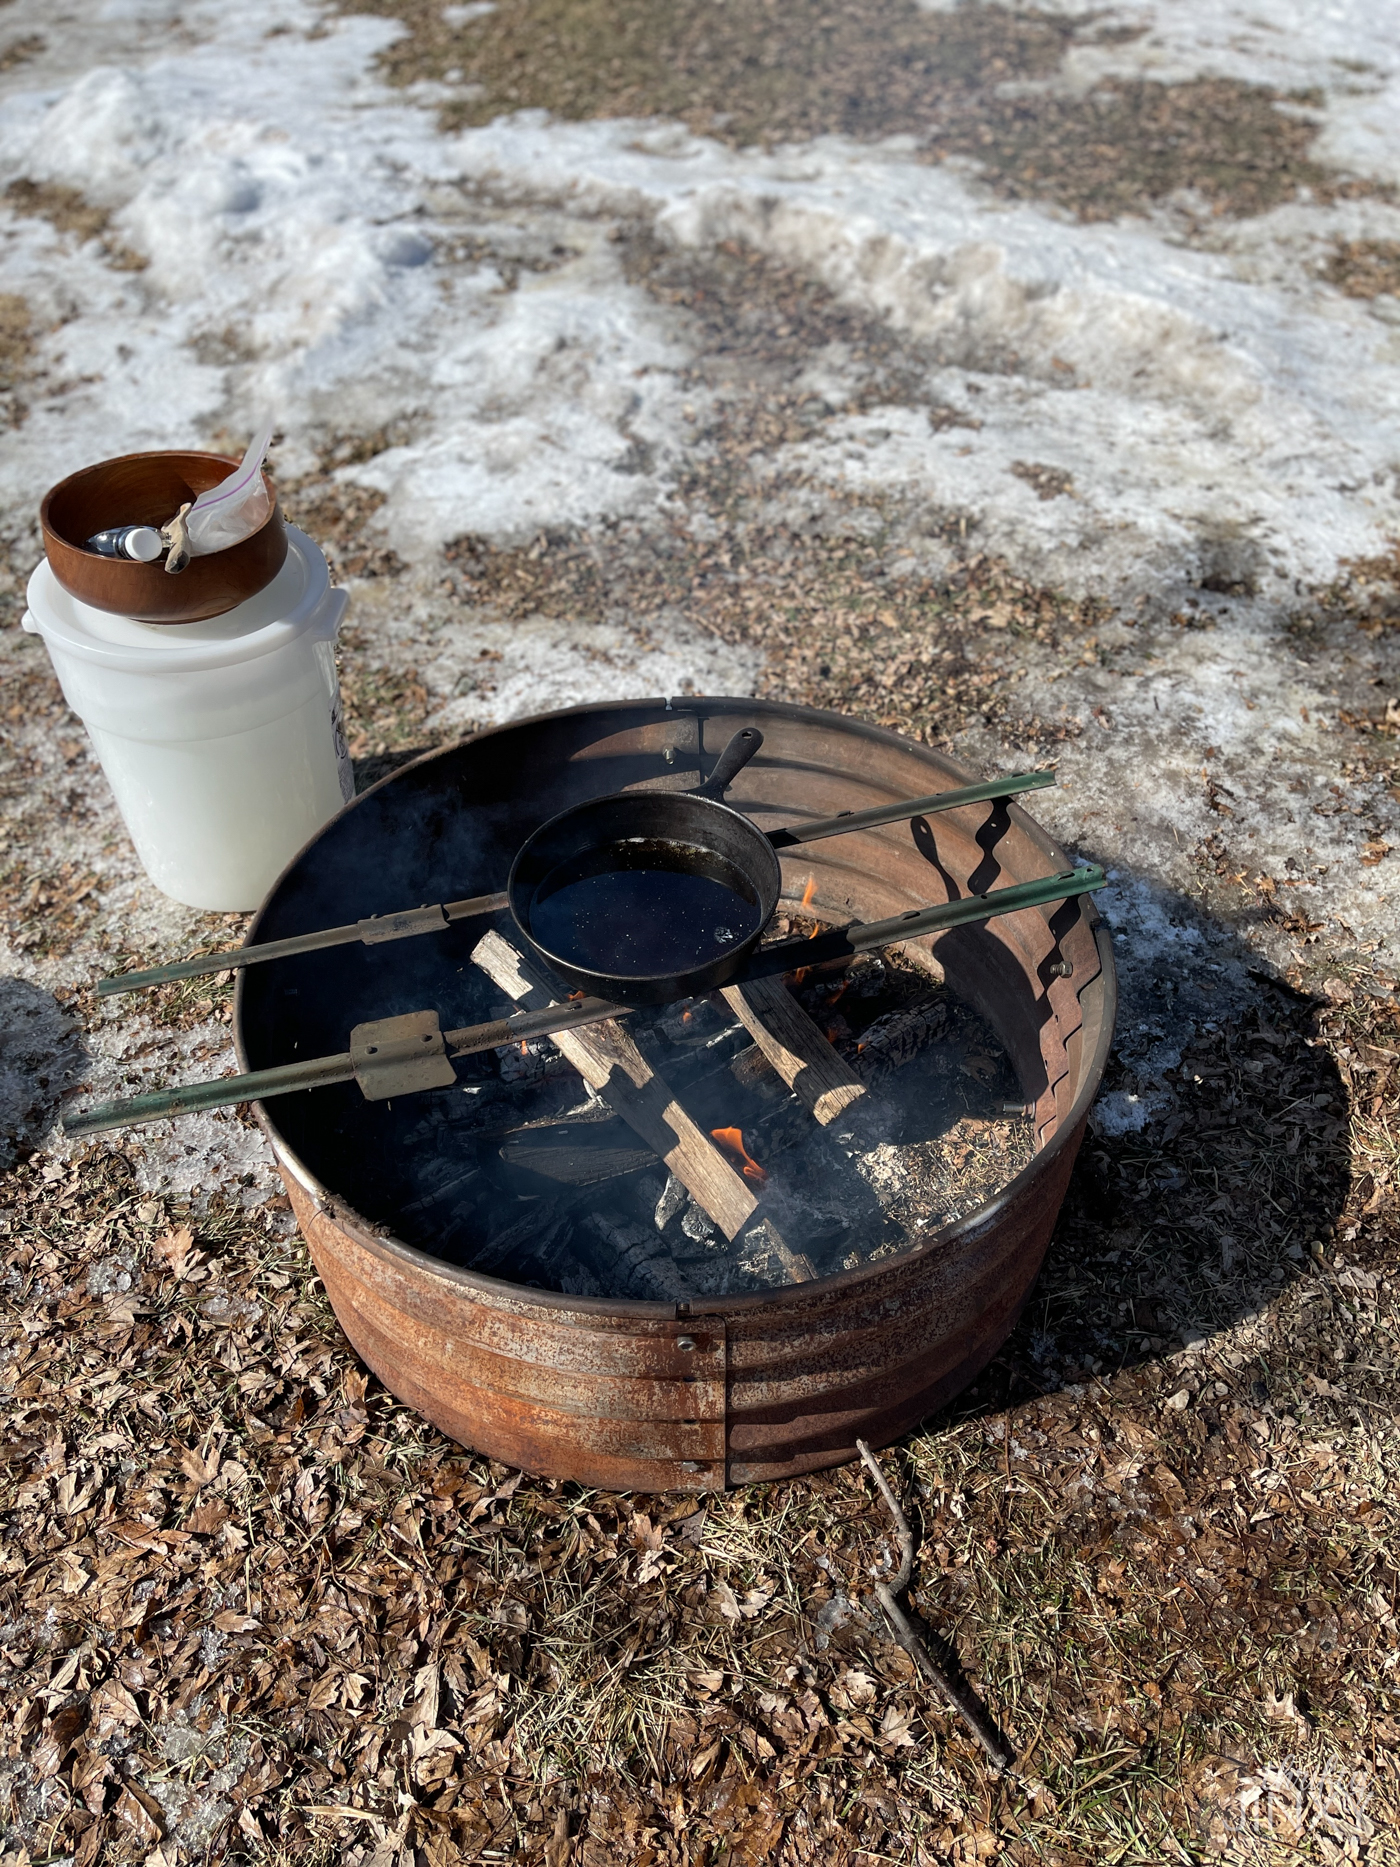 Fire for Boiling Maple Syrup